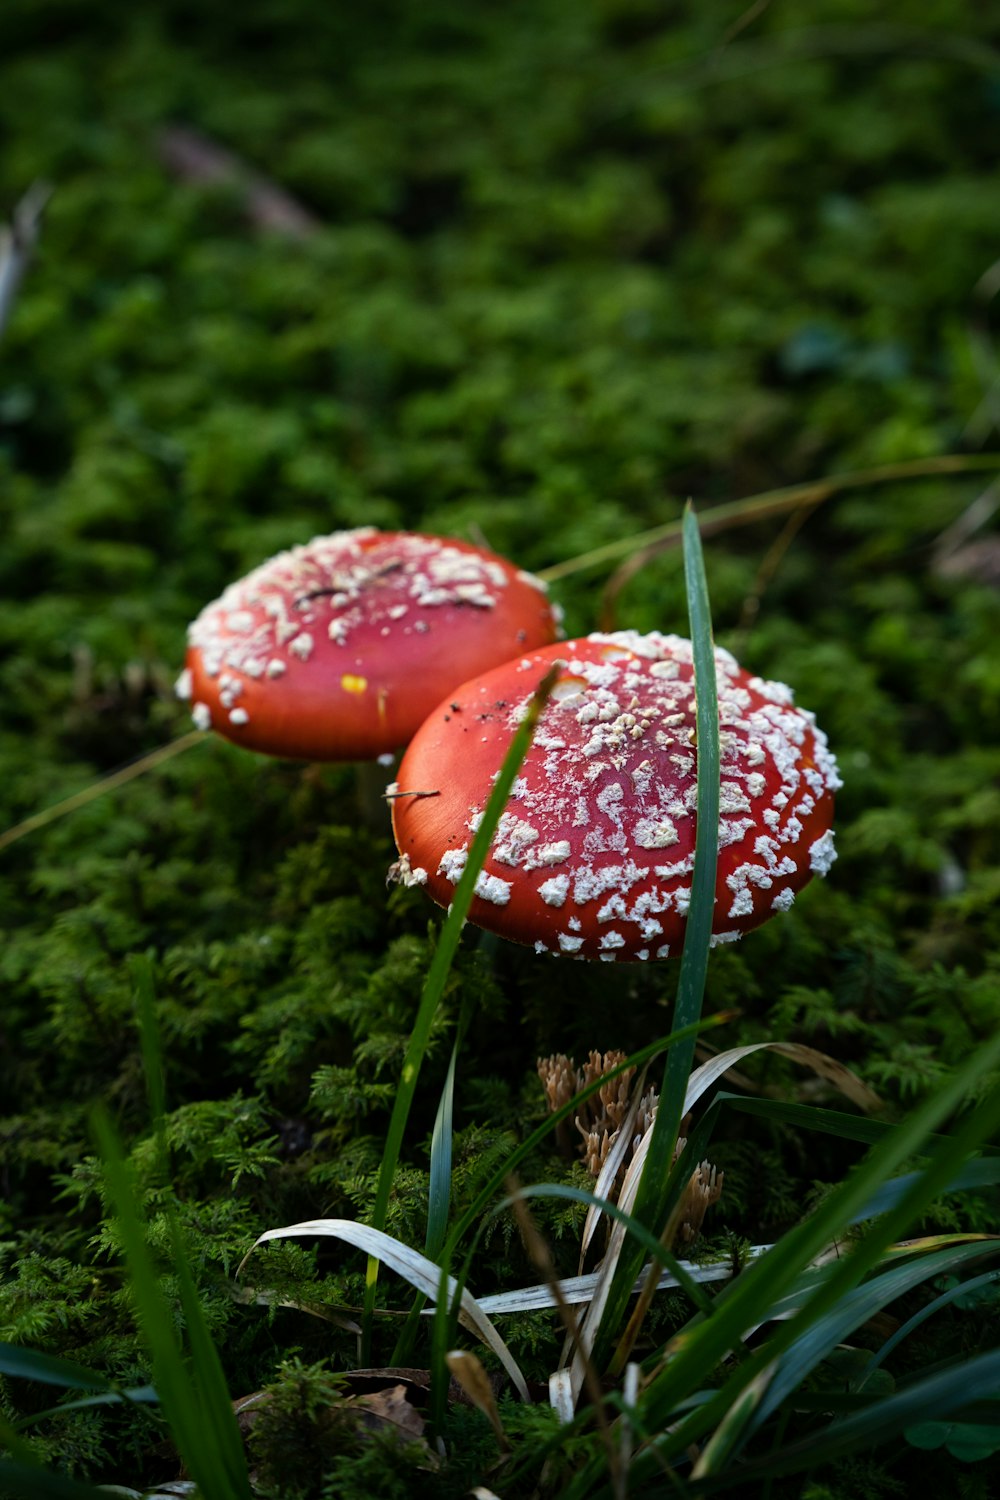 a red mushroom with water droplets on it